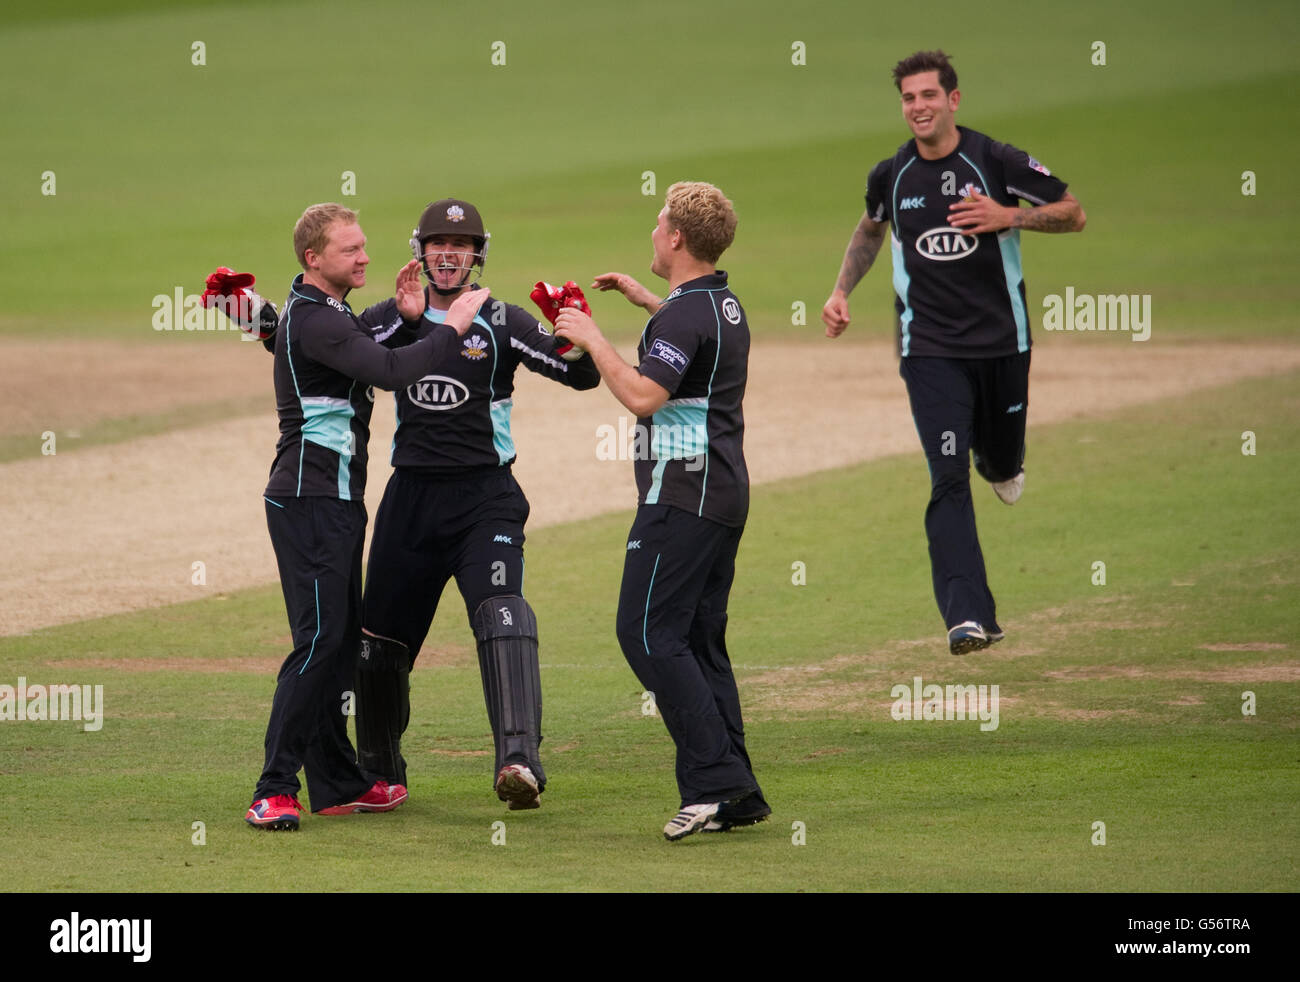 Cricket - Clydesdale Bank 40 - Group B - Surrey Lions v Durham - The Kia Oval. Surrey players celebrate wicket of Gordon Muchall caught by Tom Maynard bowled by Gareth Batty Stock Photo